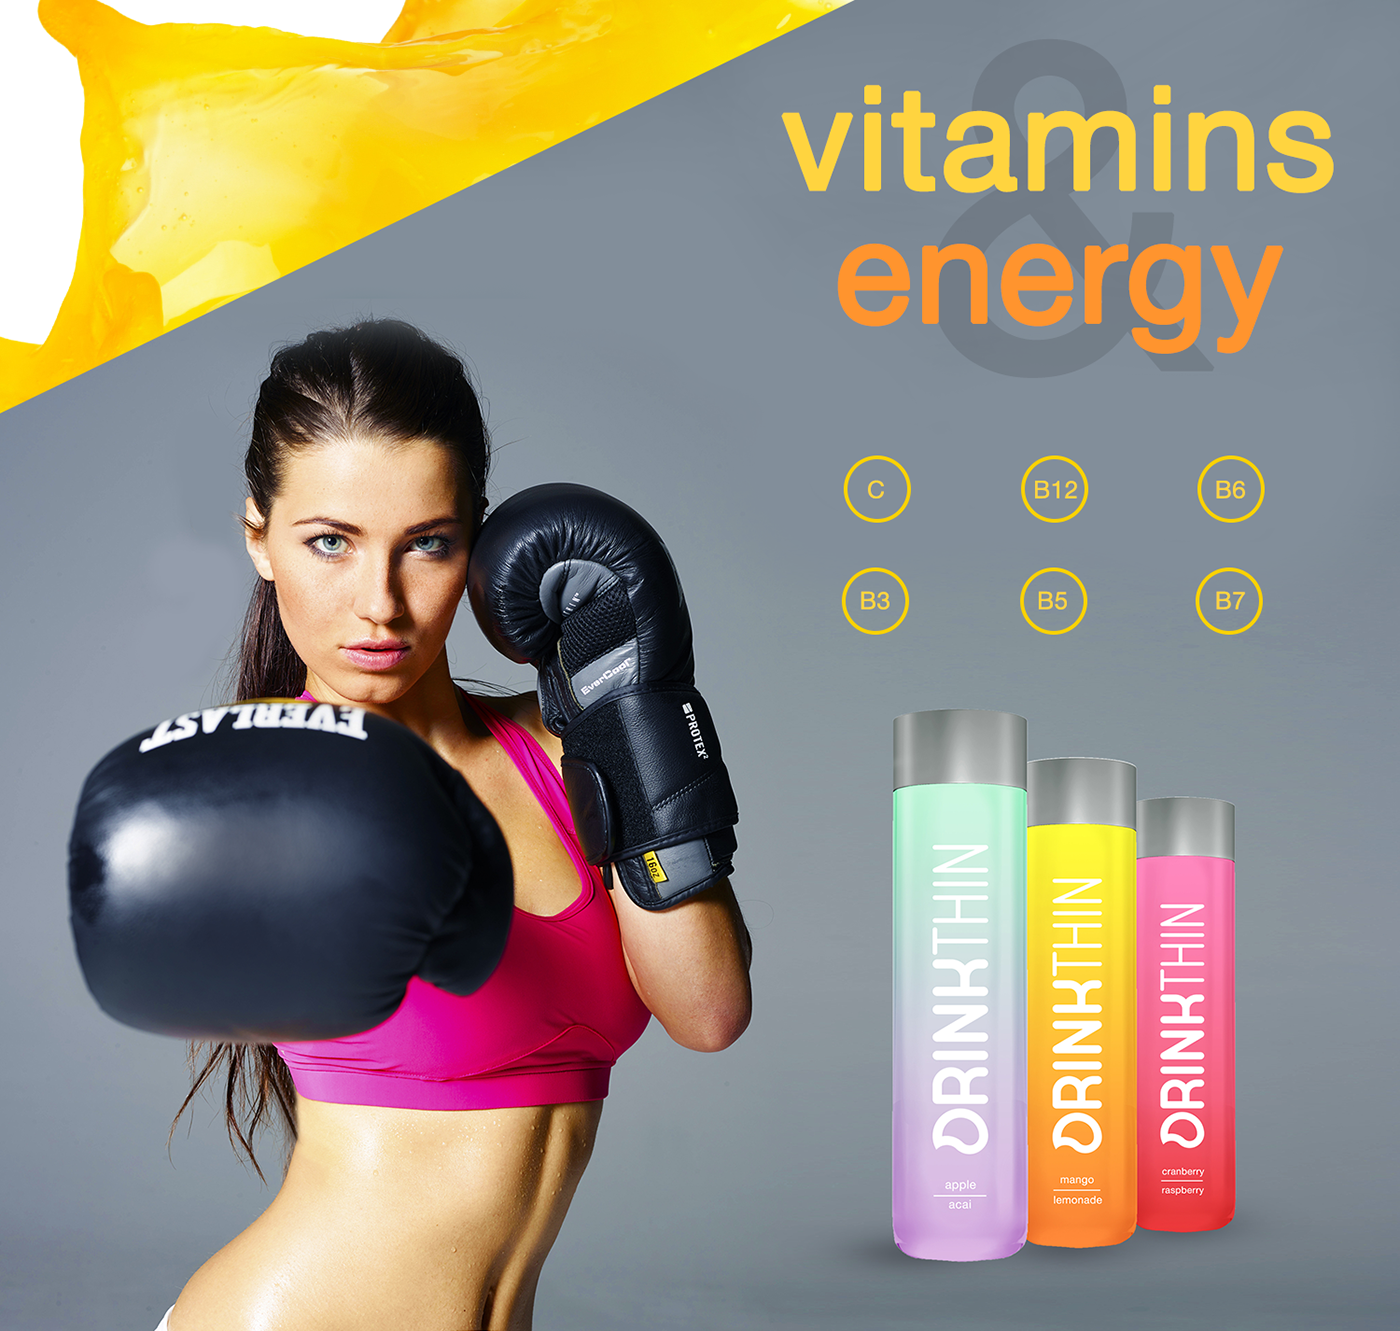 drink energy energetic weight-loss weightloss Weight loss beverage